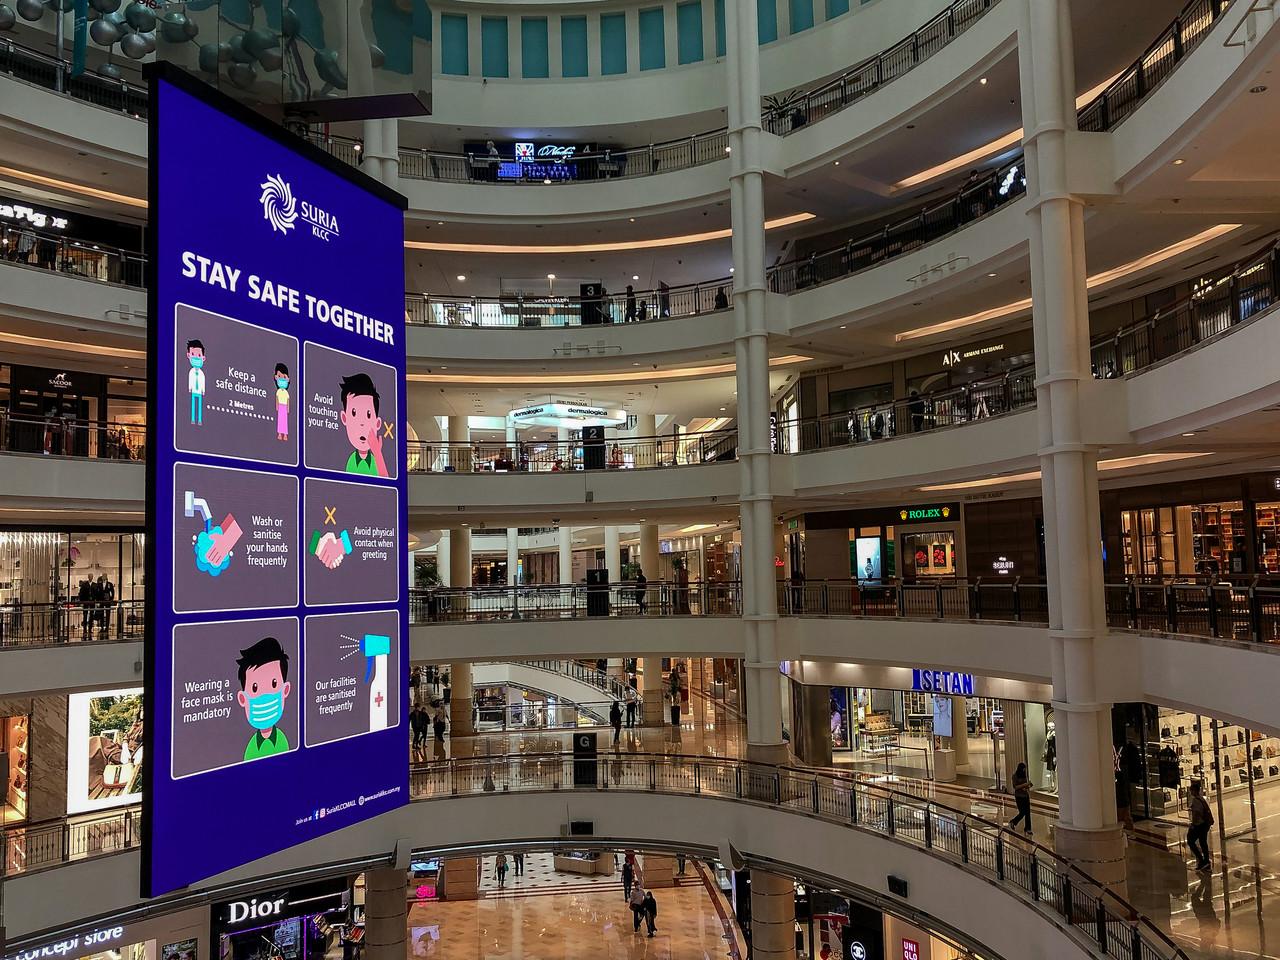 A message reminding customers to comply with Covid-19 SOPs looms over shoppers at the Suria KLCC mall in Kuala Lumpur. Photo: Bernama